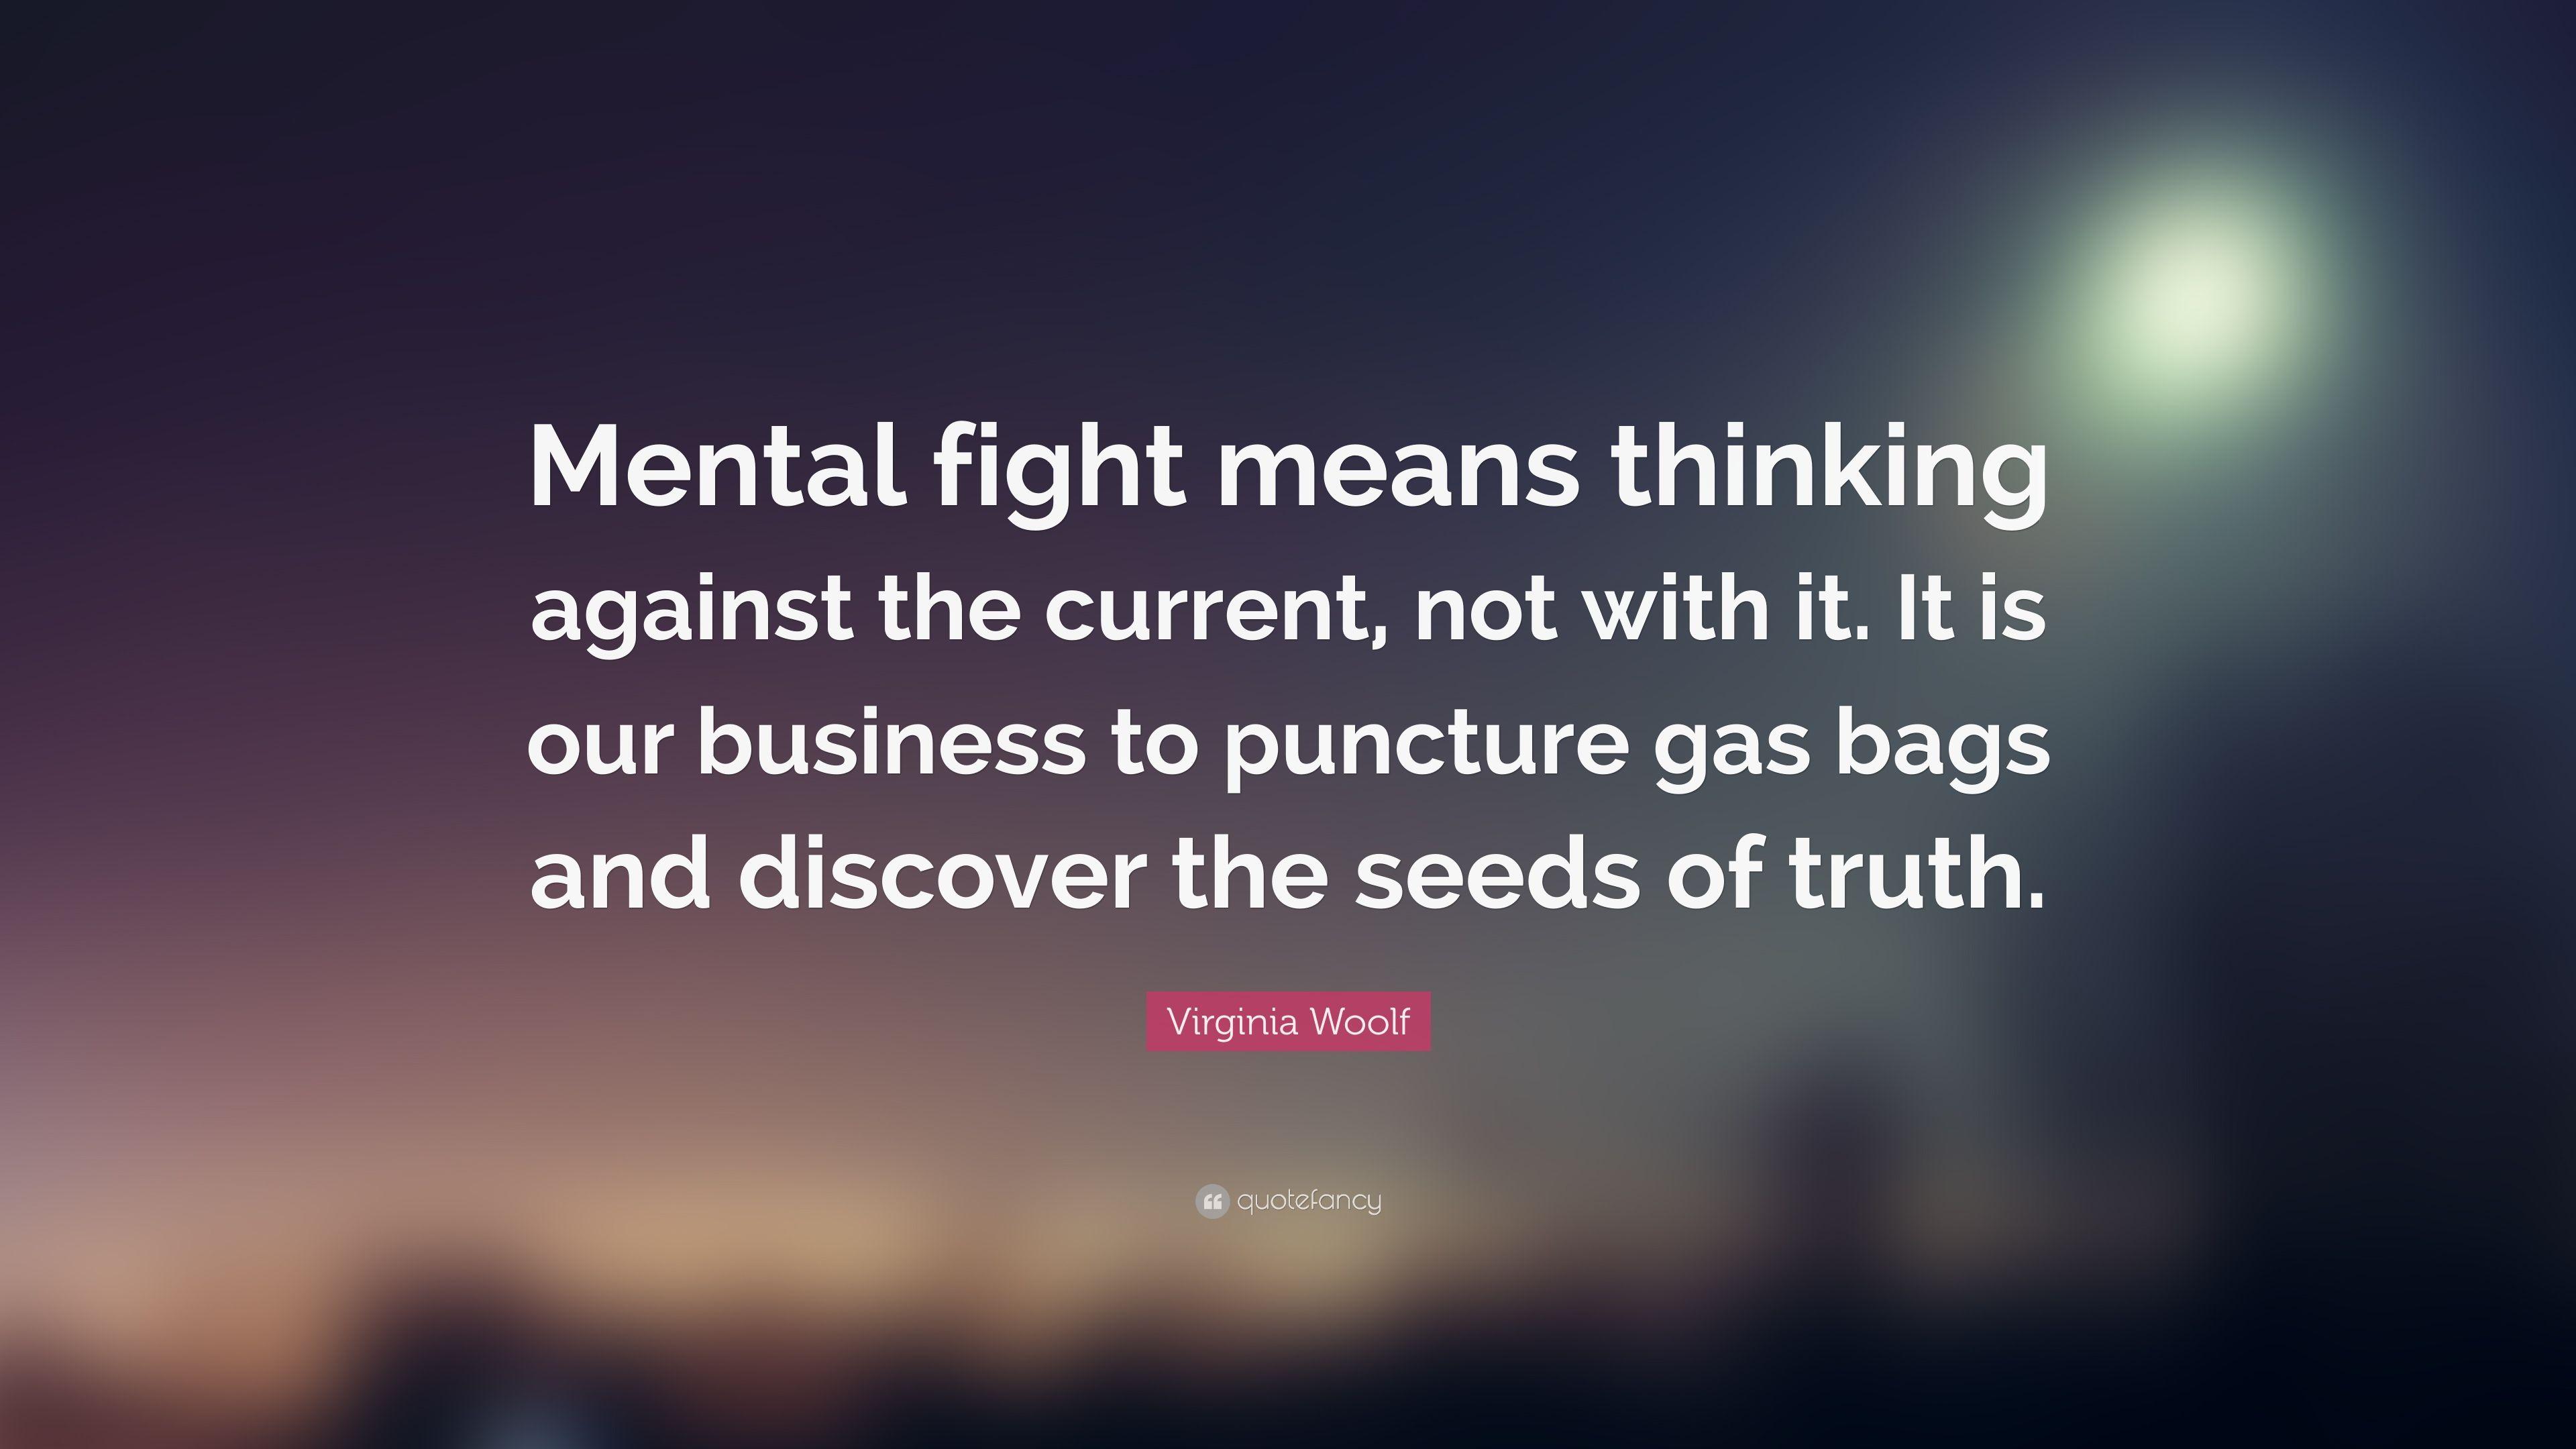 Virginia Woolf Quote: “Mental fight means thinking against